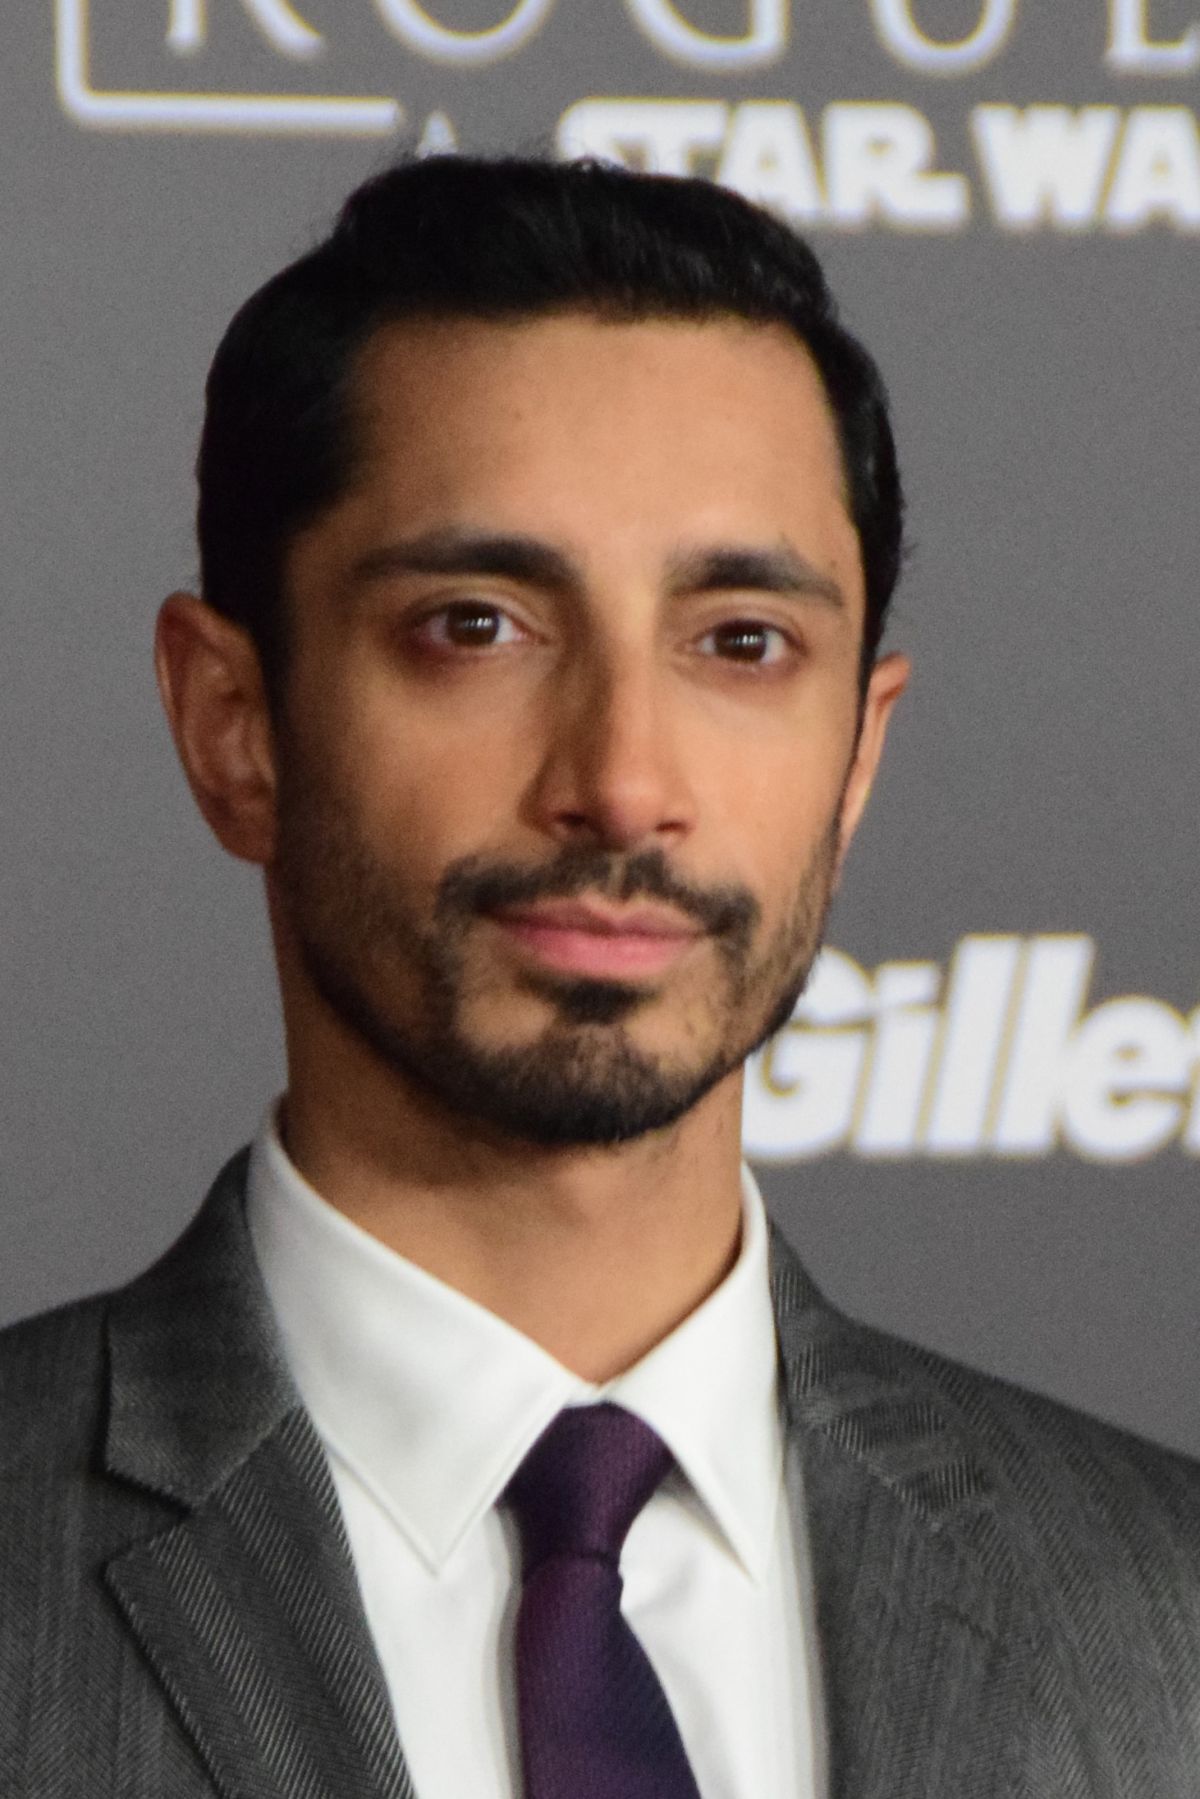 Actor Riz Ahmed lost two family members due to Corona virus